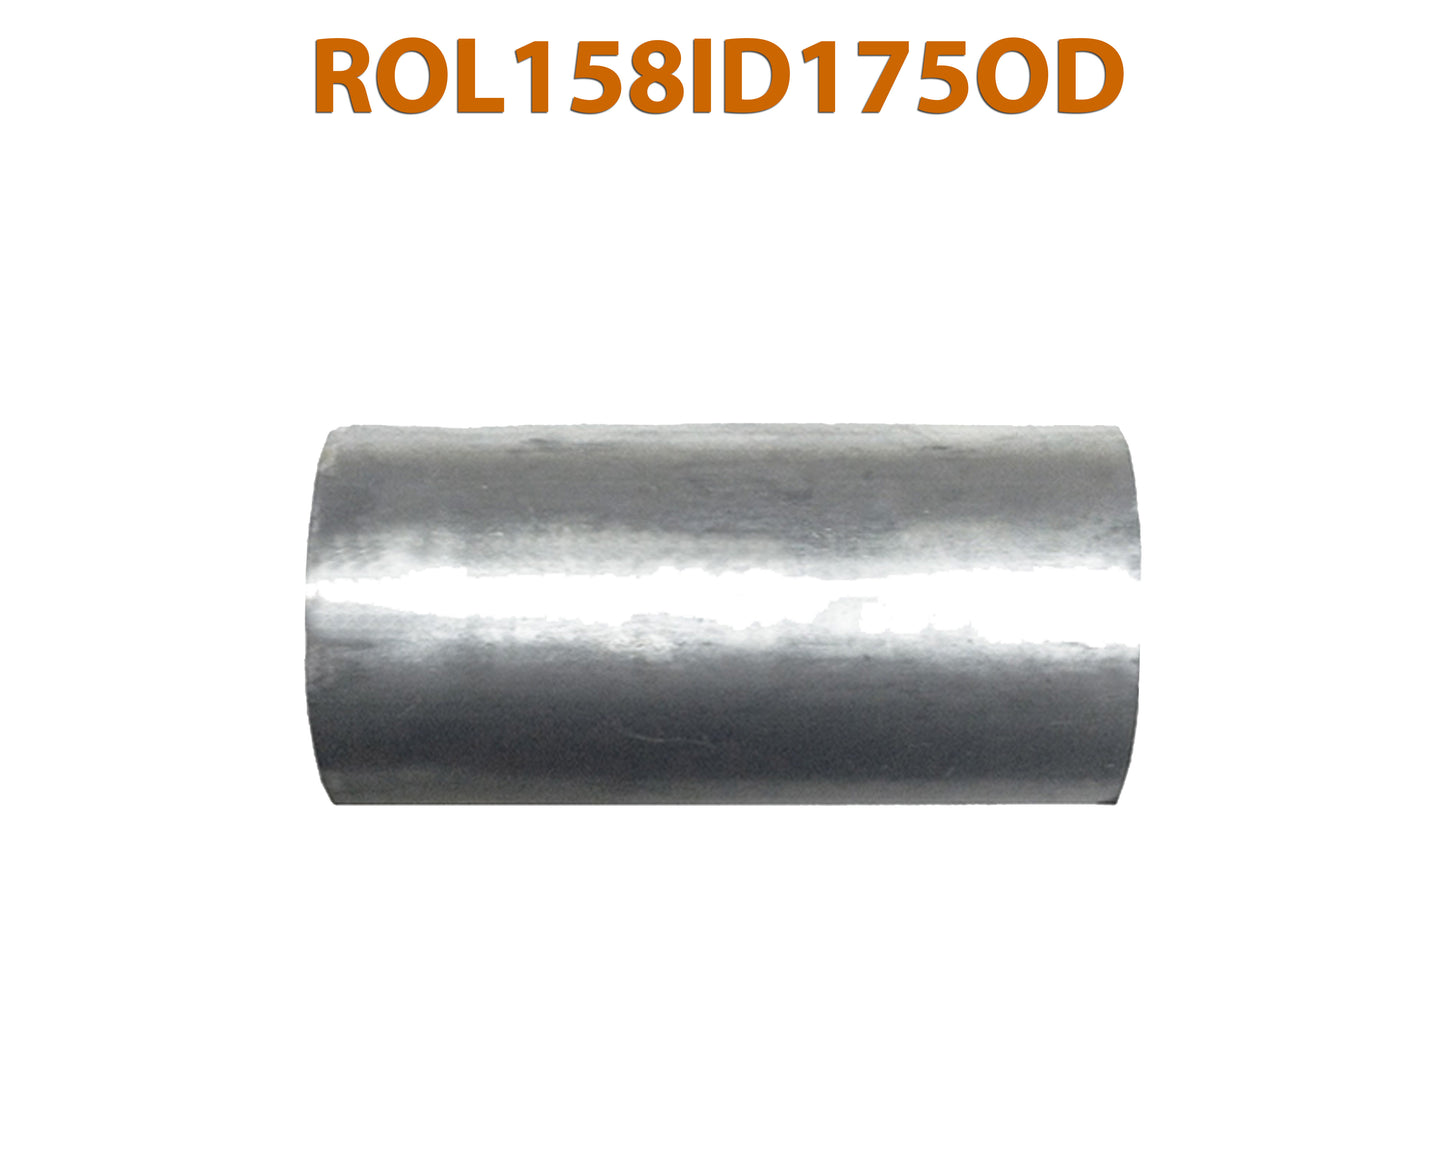 ROL158ID175OD 548536 1 5/8” ID to 1 3/4" OD Universal Exhaust Pipe to Component Adapter Reducer